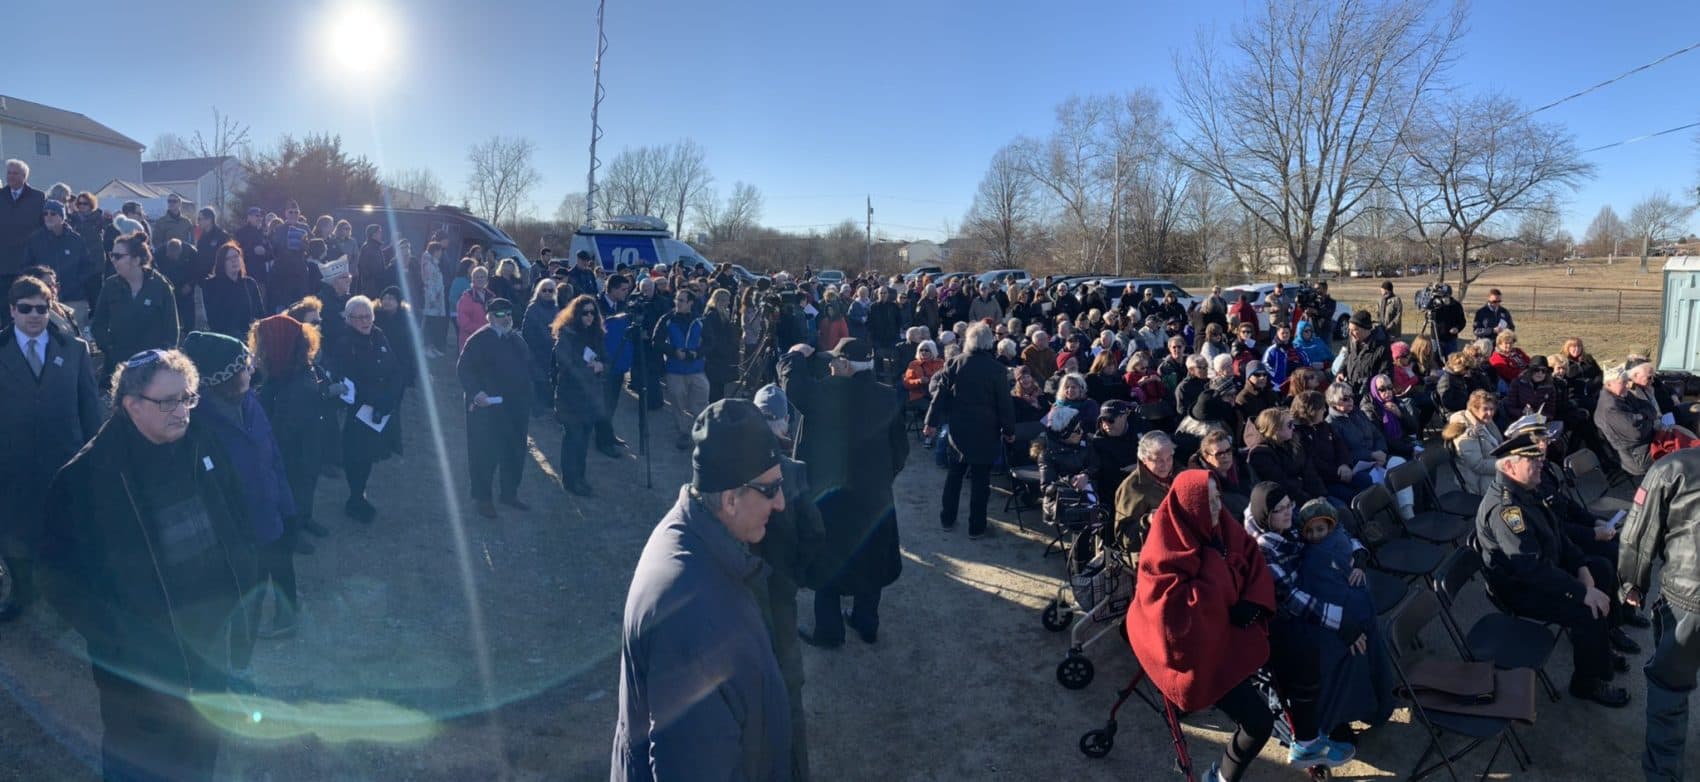 Hundreds gather at a Fall River Jewish cemetery for an antisemitism vigil after dozens of gravestones were vandalized. (Simón Rios/WBUR)